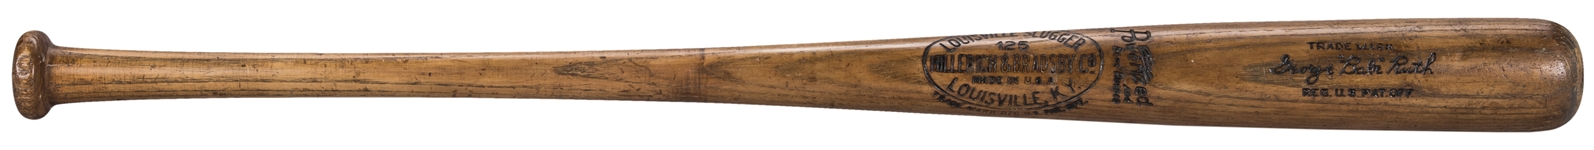 1932 Babe Ruth Game Used & Signed Hillerich & Bradsby His 4-18-32 Model Bat (PSA/DNA GU 9.5) - Fresh to the Hobby